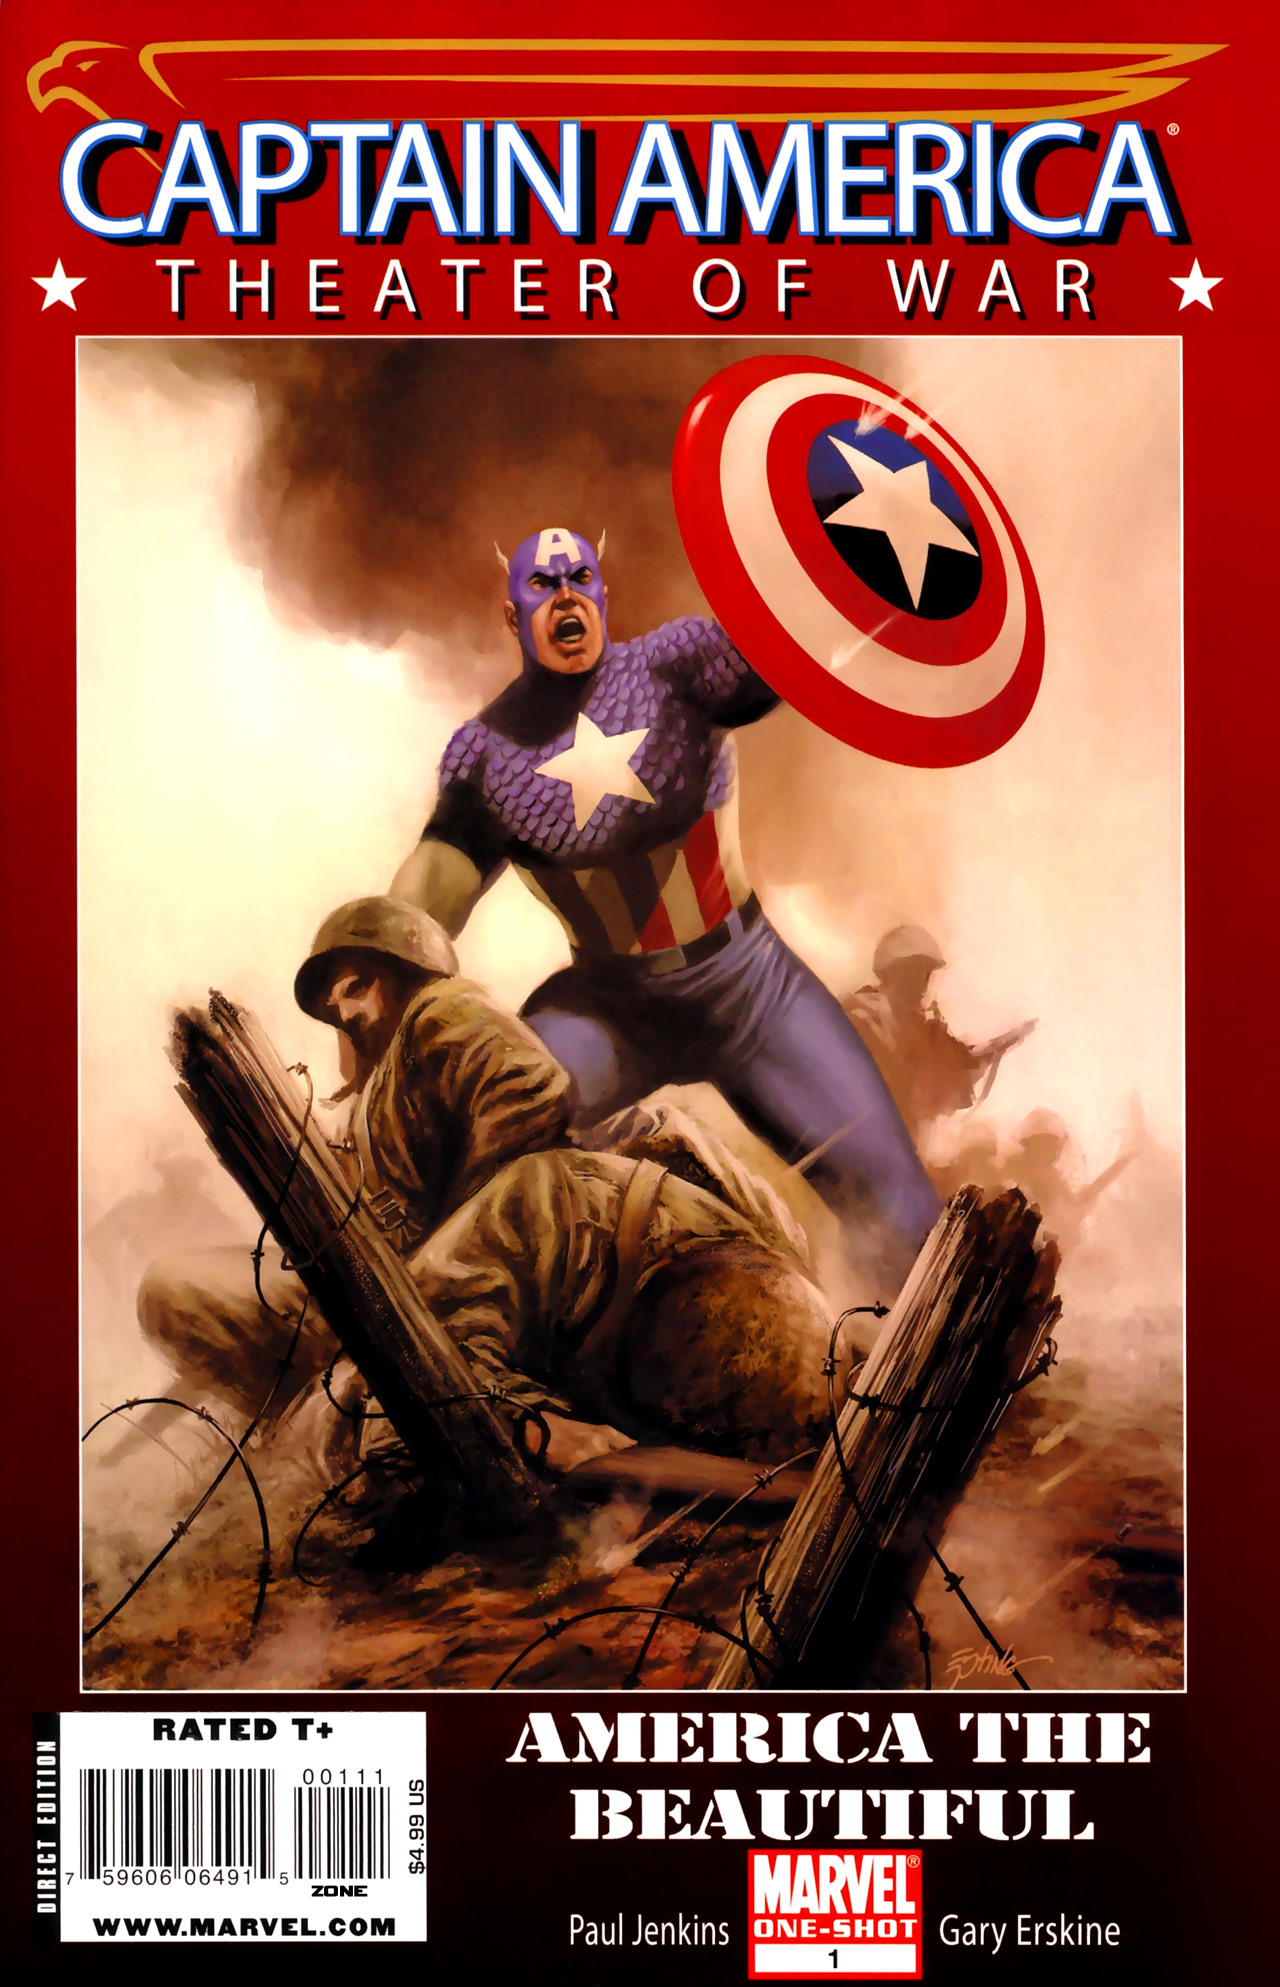 Read online Captain America Theater of War: America the Beautiful comic -  Issue # Full - 1